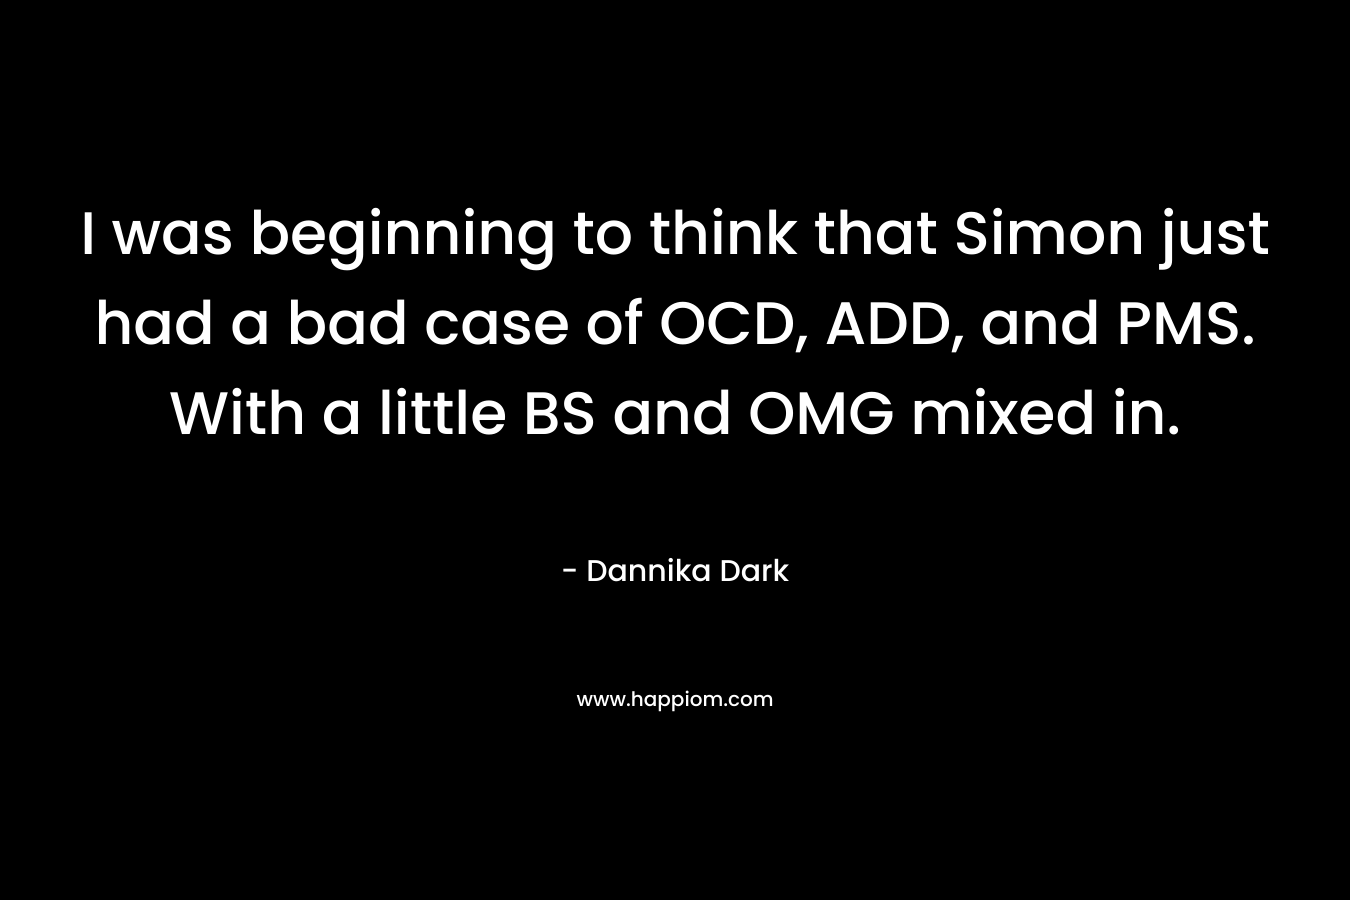 I was beginning to think that Simon just had a bad case of OCD, ADD, and PMS. With a little BS and OMG mixed in. – Dannika Dark